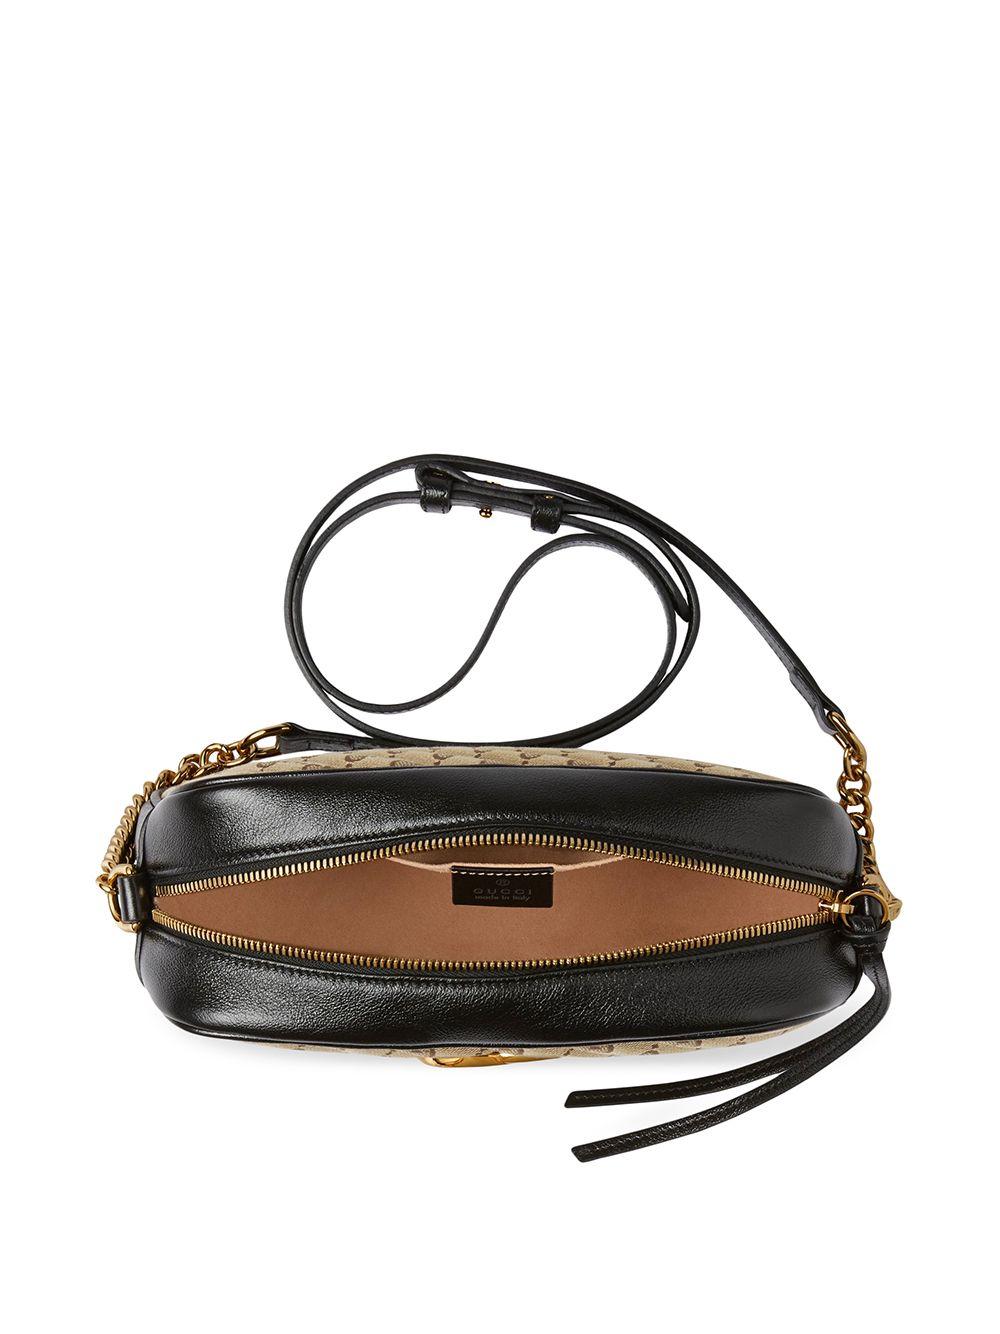 GUCCI GG Marmont Small Shoulder Bag in Original GG Canvas – COCOON